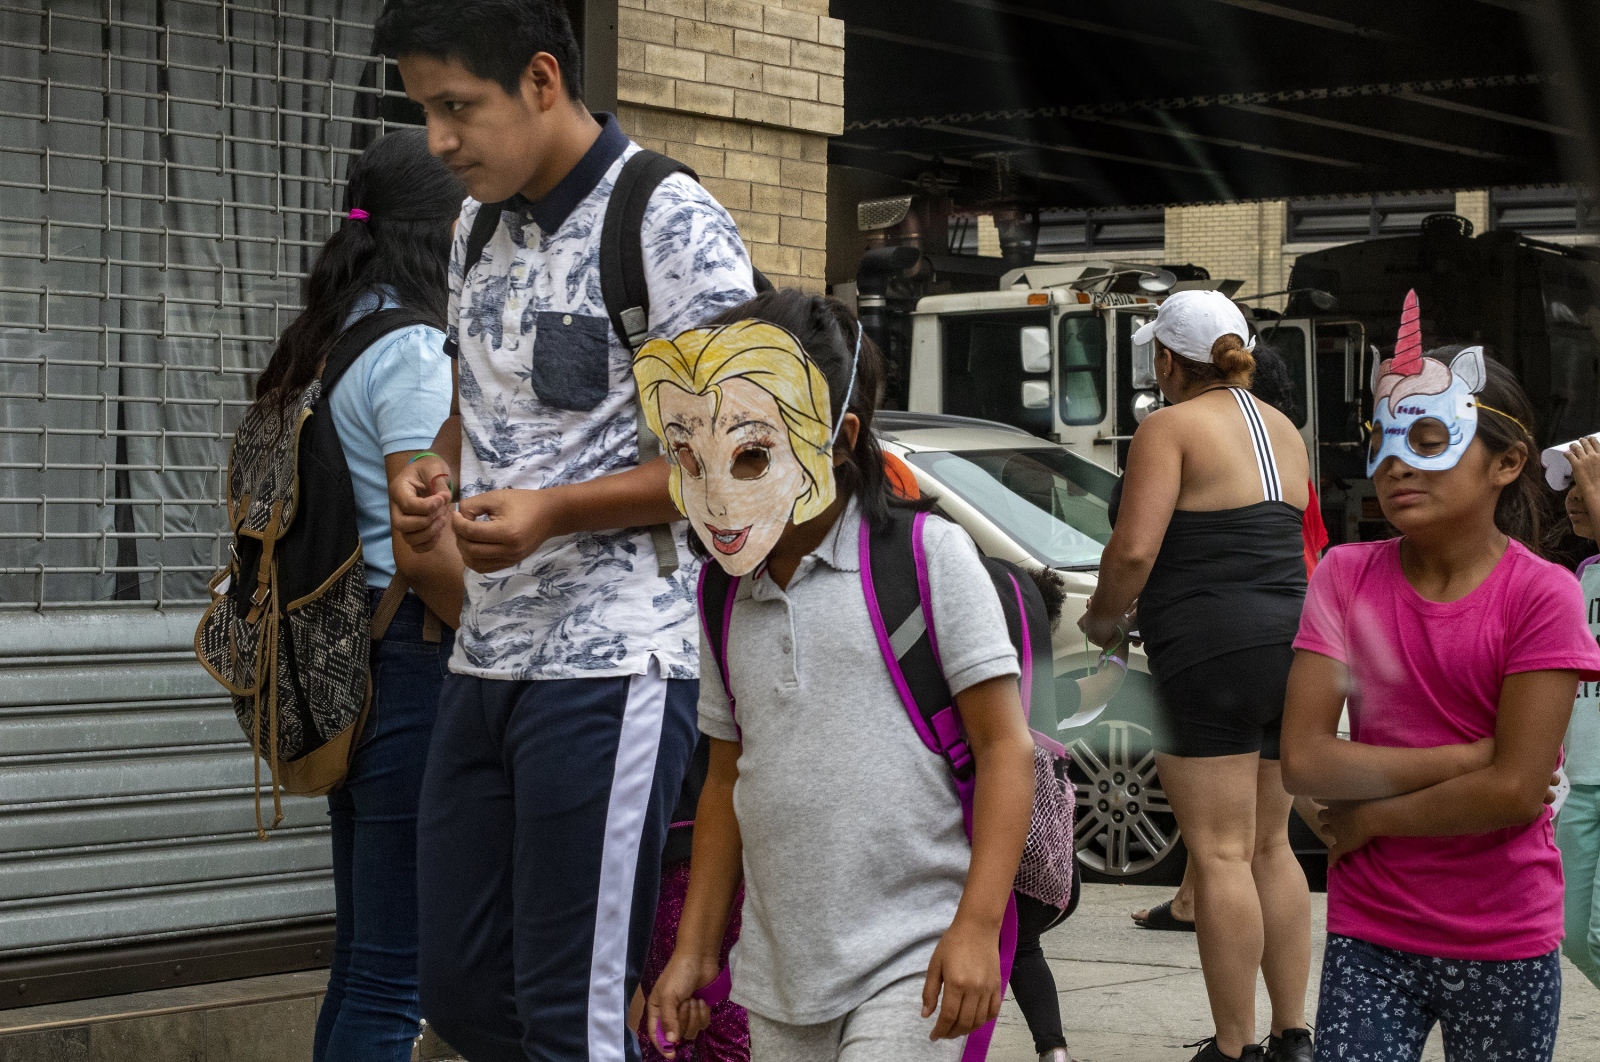  Migrant Children leaving the Cayuga Center at 1916 Park Ave in East Harlem wear masks to protect their identity, Manhattan, NY June 22, 2018(Kevin C Downs/Agence Cosmos) 